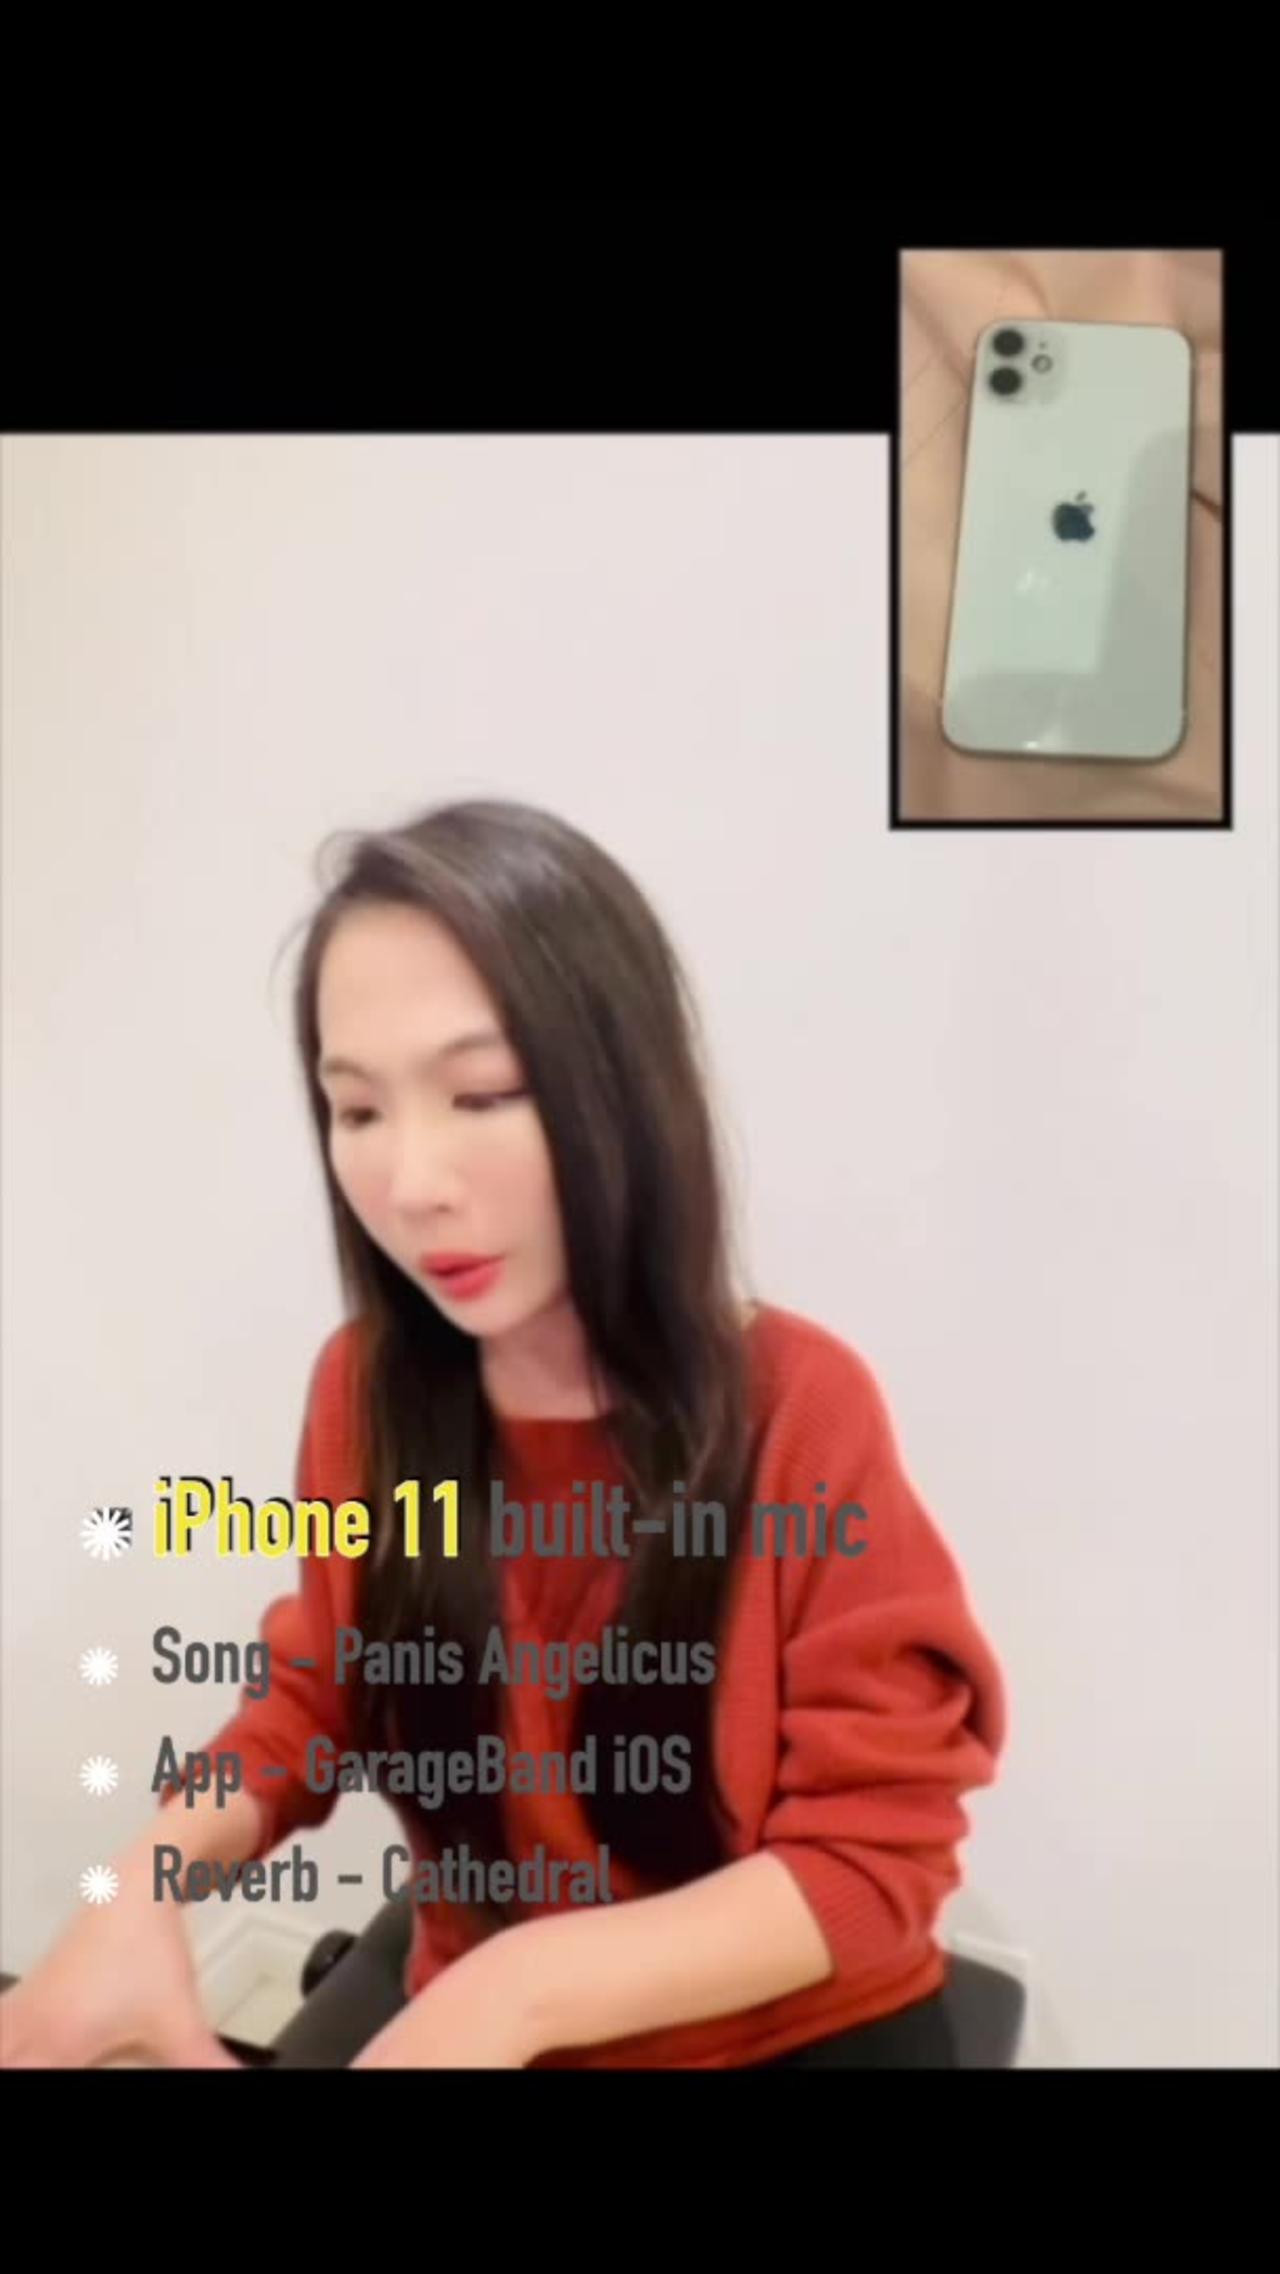 iPhone XR and iPhone 11 built in mic recording